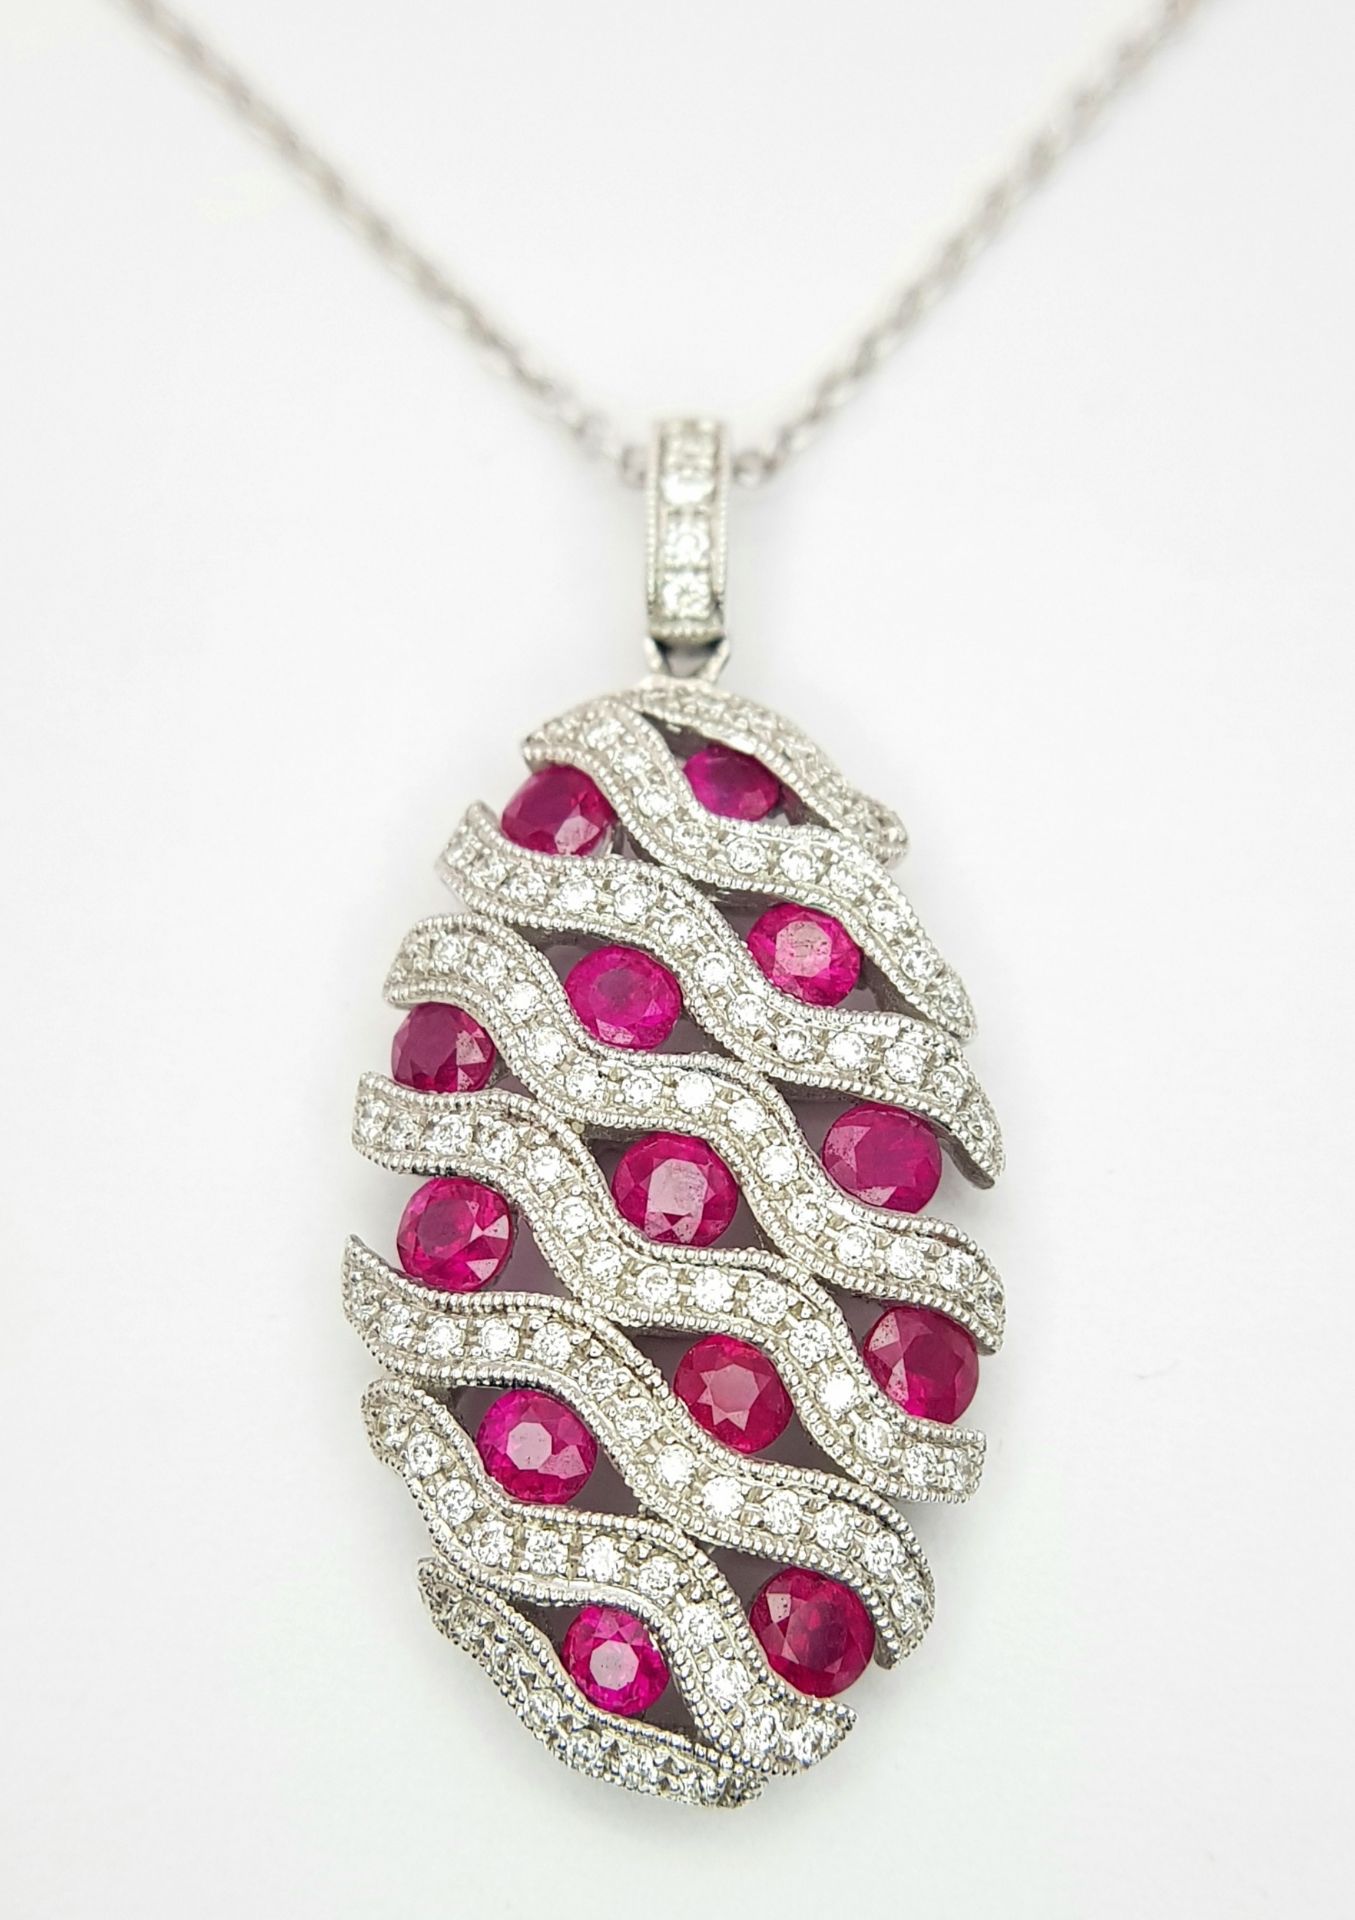 AN 18K WHITE GOLD DIAMOND AND RUBY PENDANT - 0.49CT OF DIAMONDS AND 2.29CT OF RUBIES. 6.2G WEIGHT. - Image 2 of 16